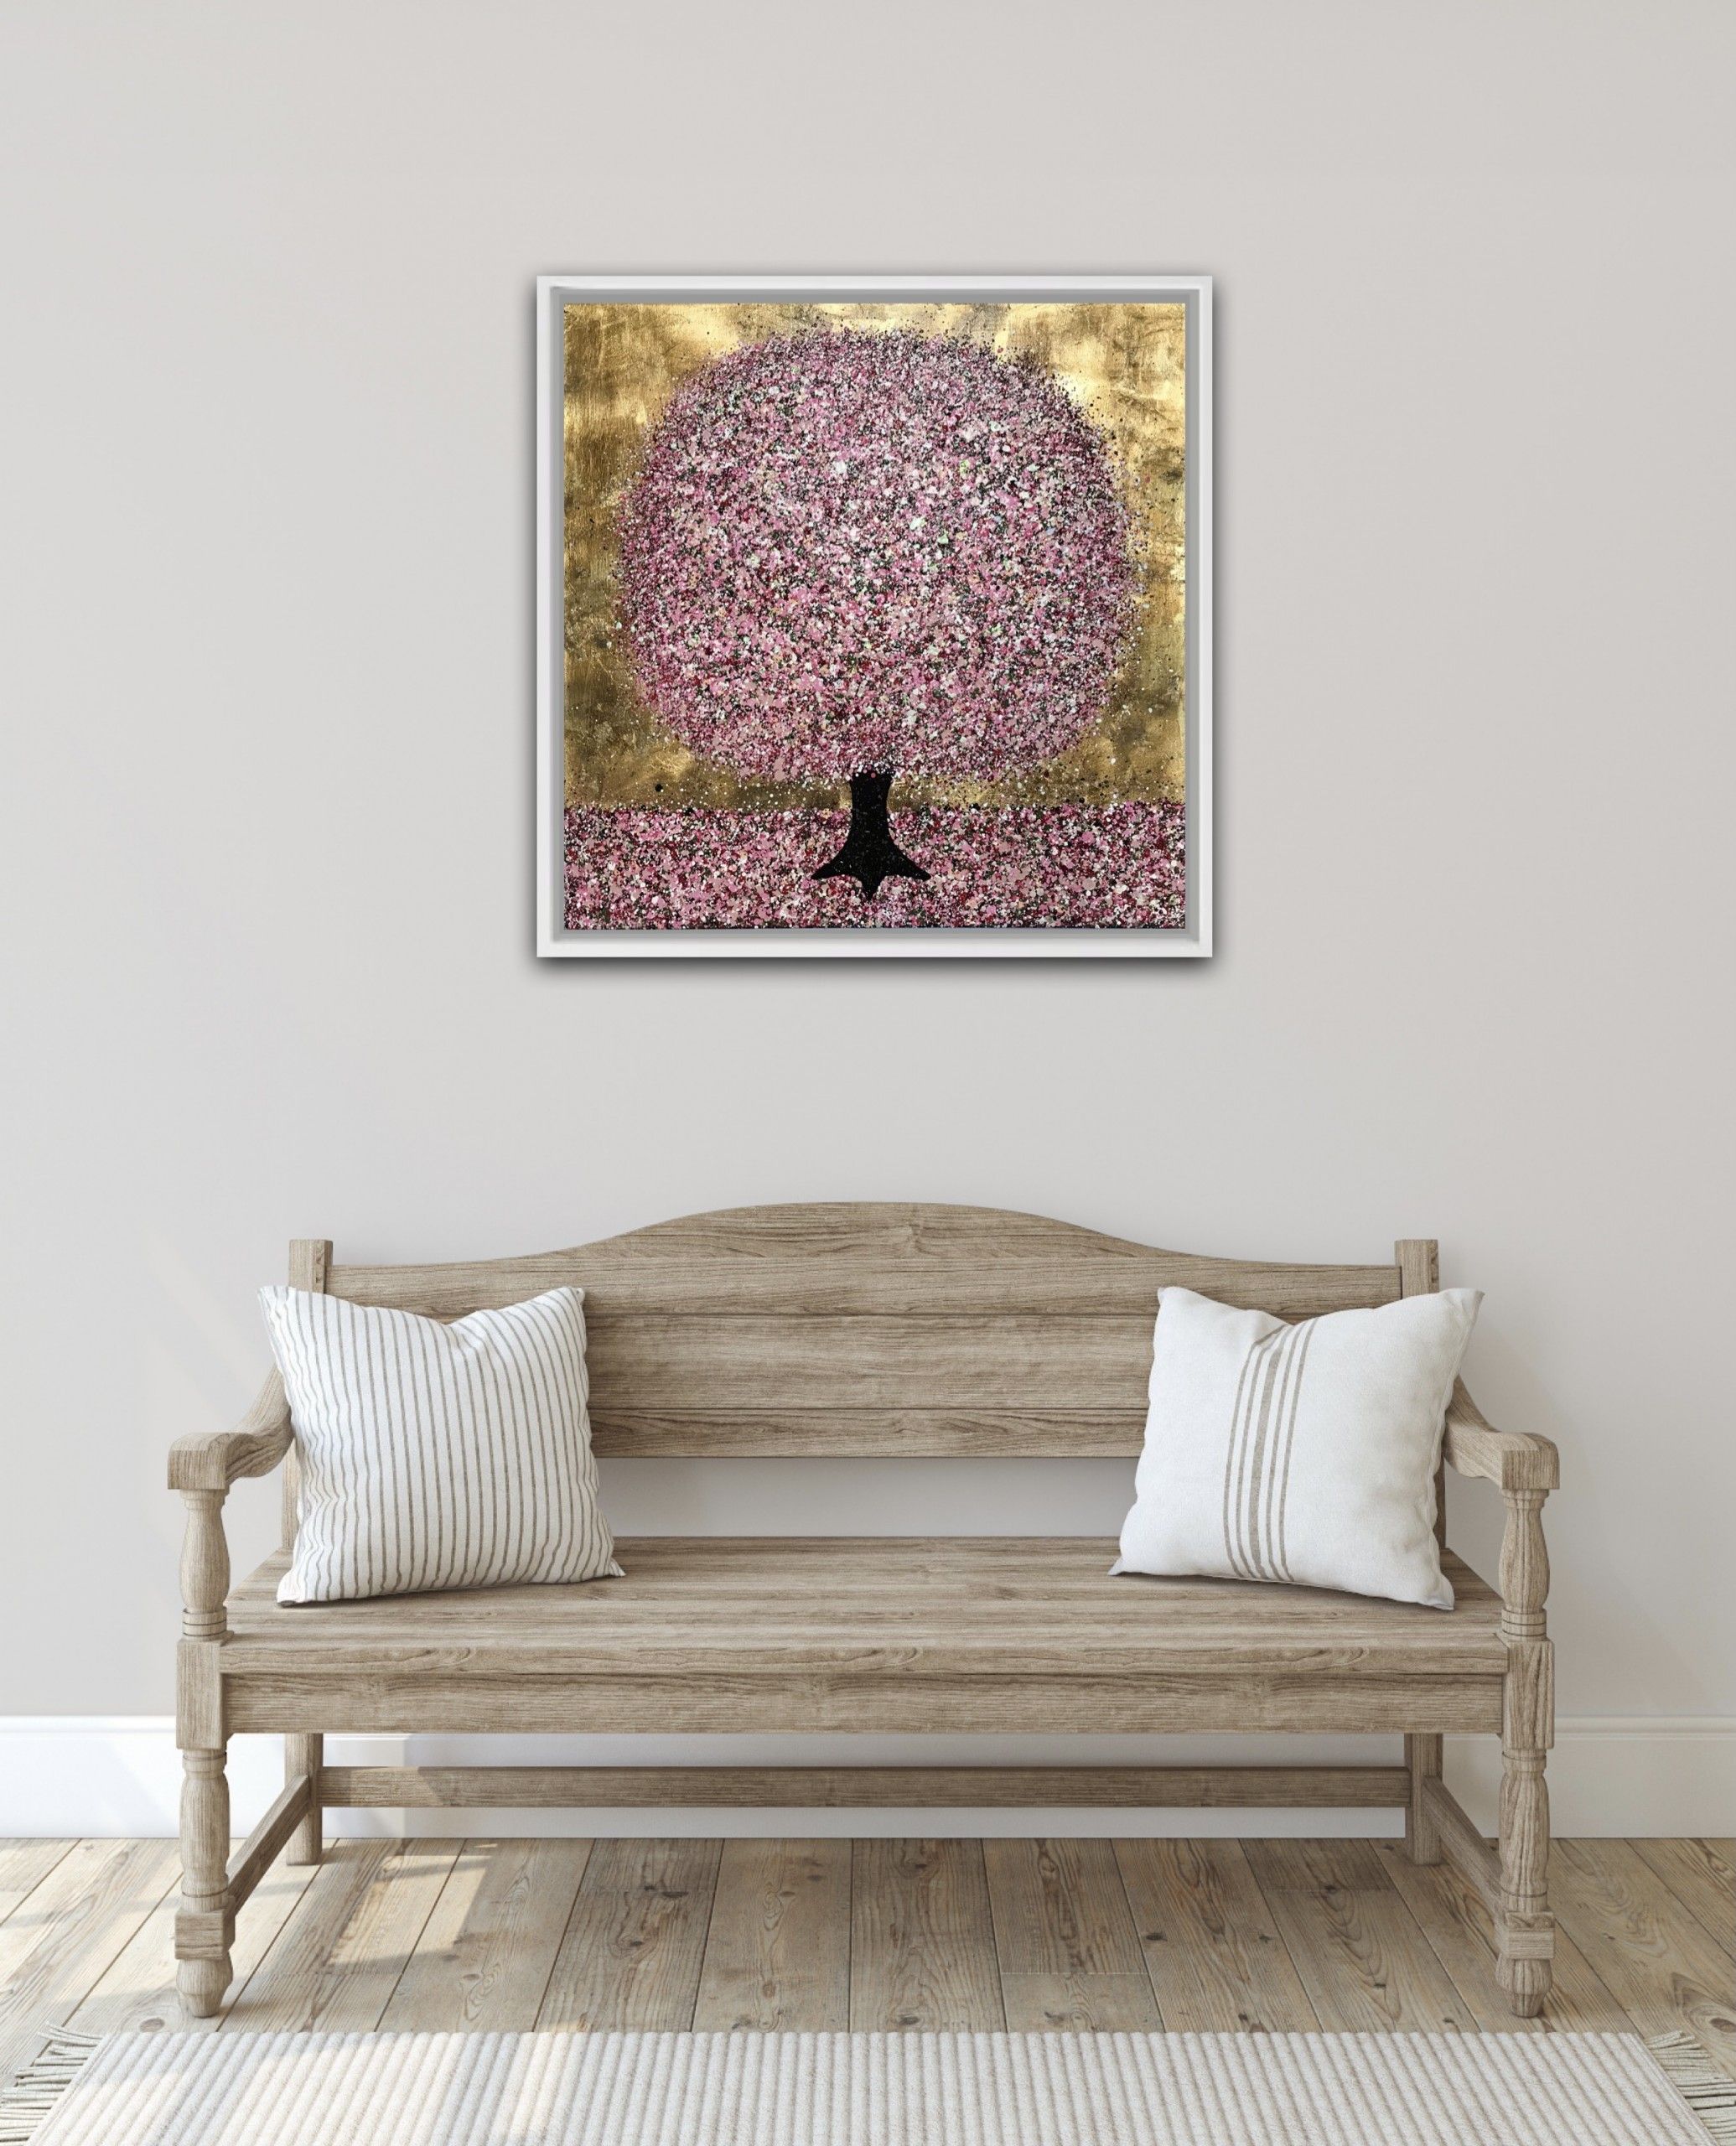 Tumbling Blossom on a Spring Evening by Nicky Chubb - Secondary Image